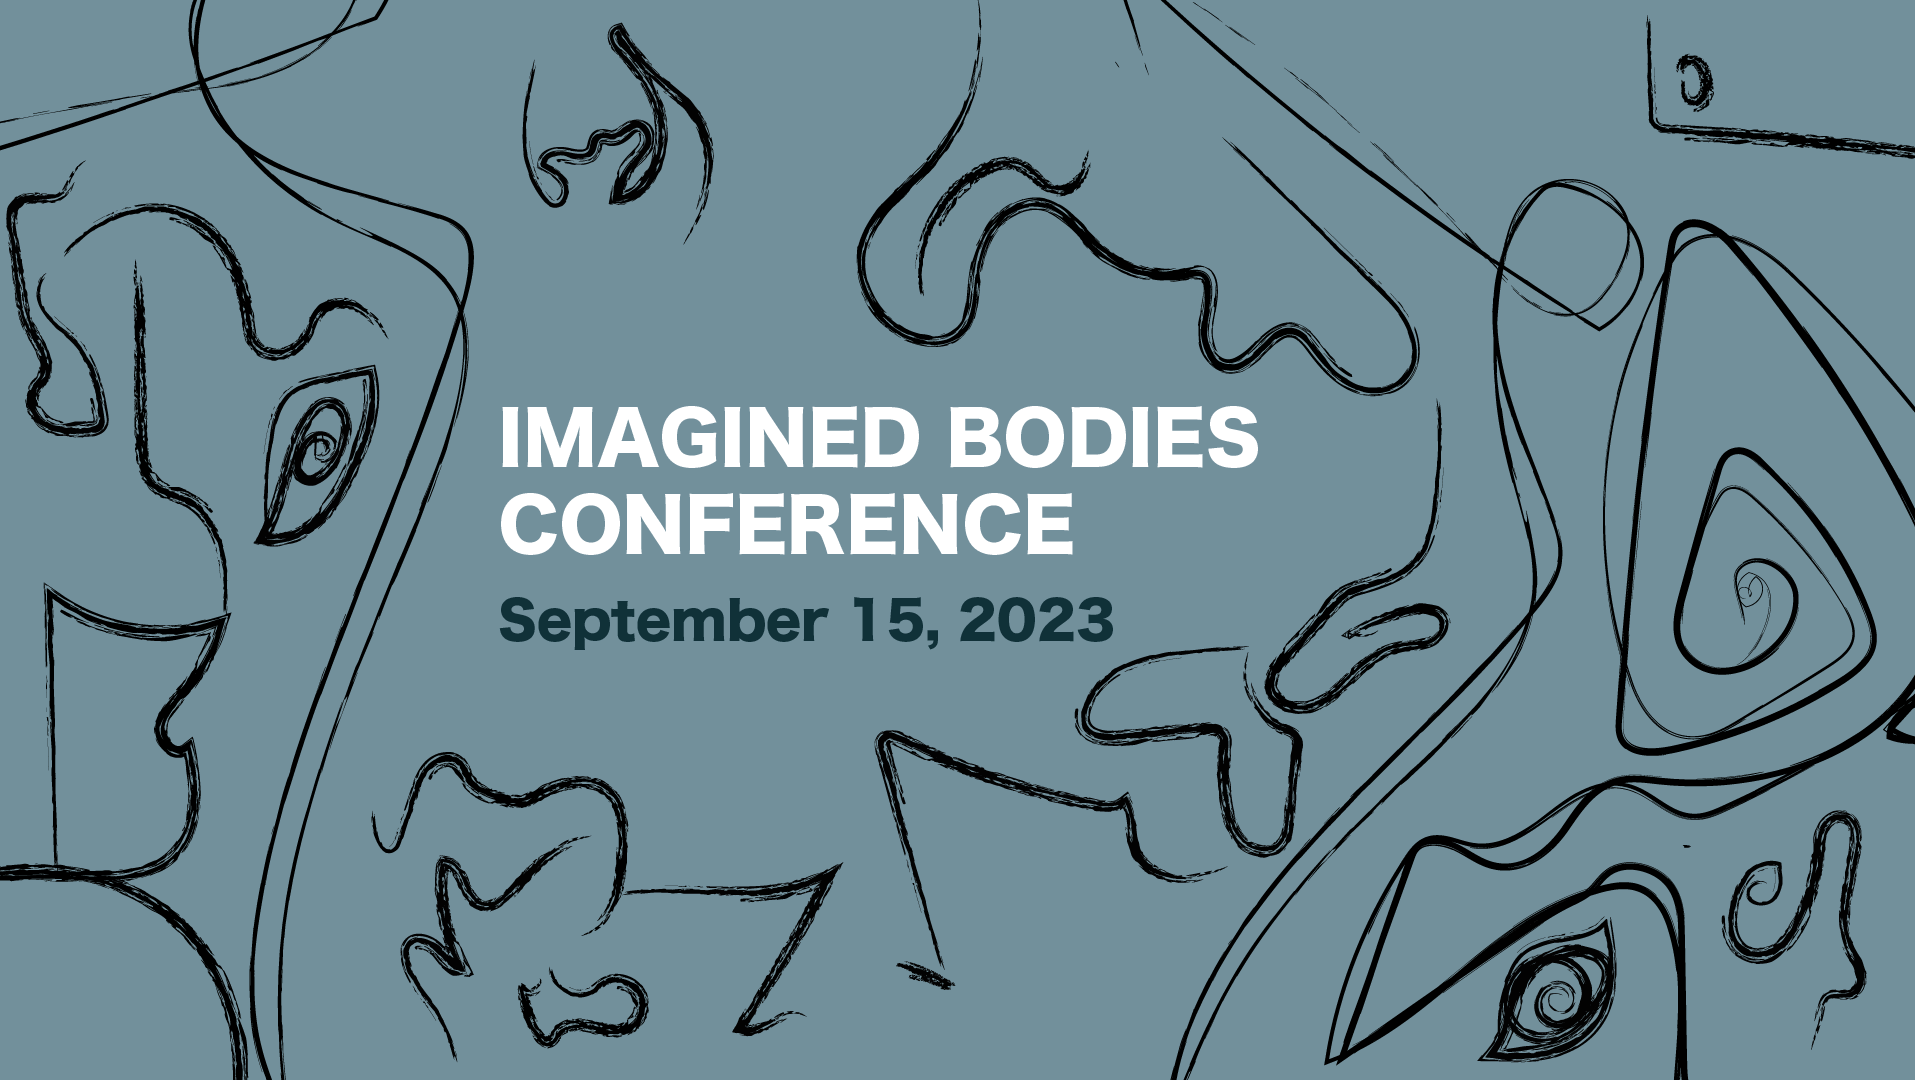 Imagined Bodies Conference logo